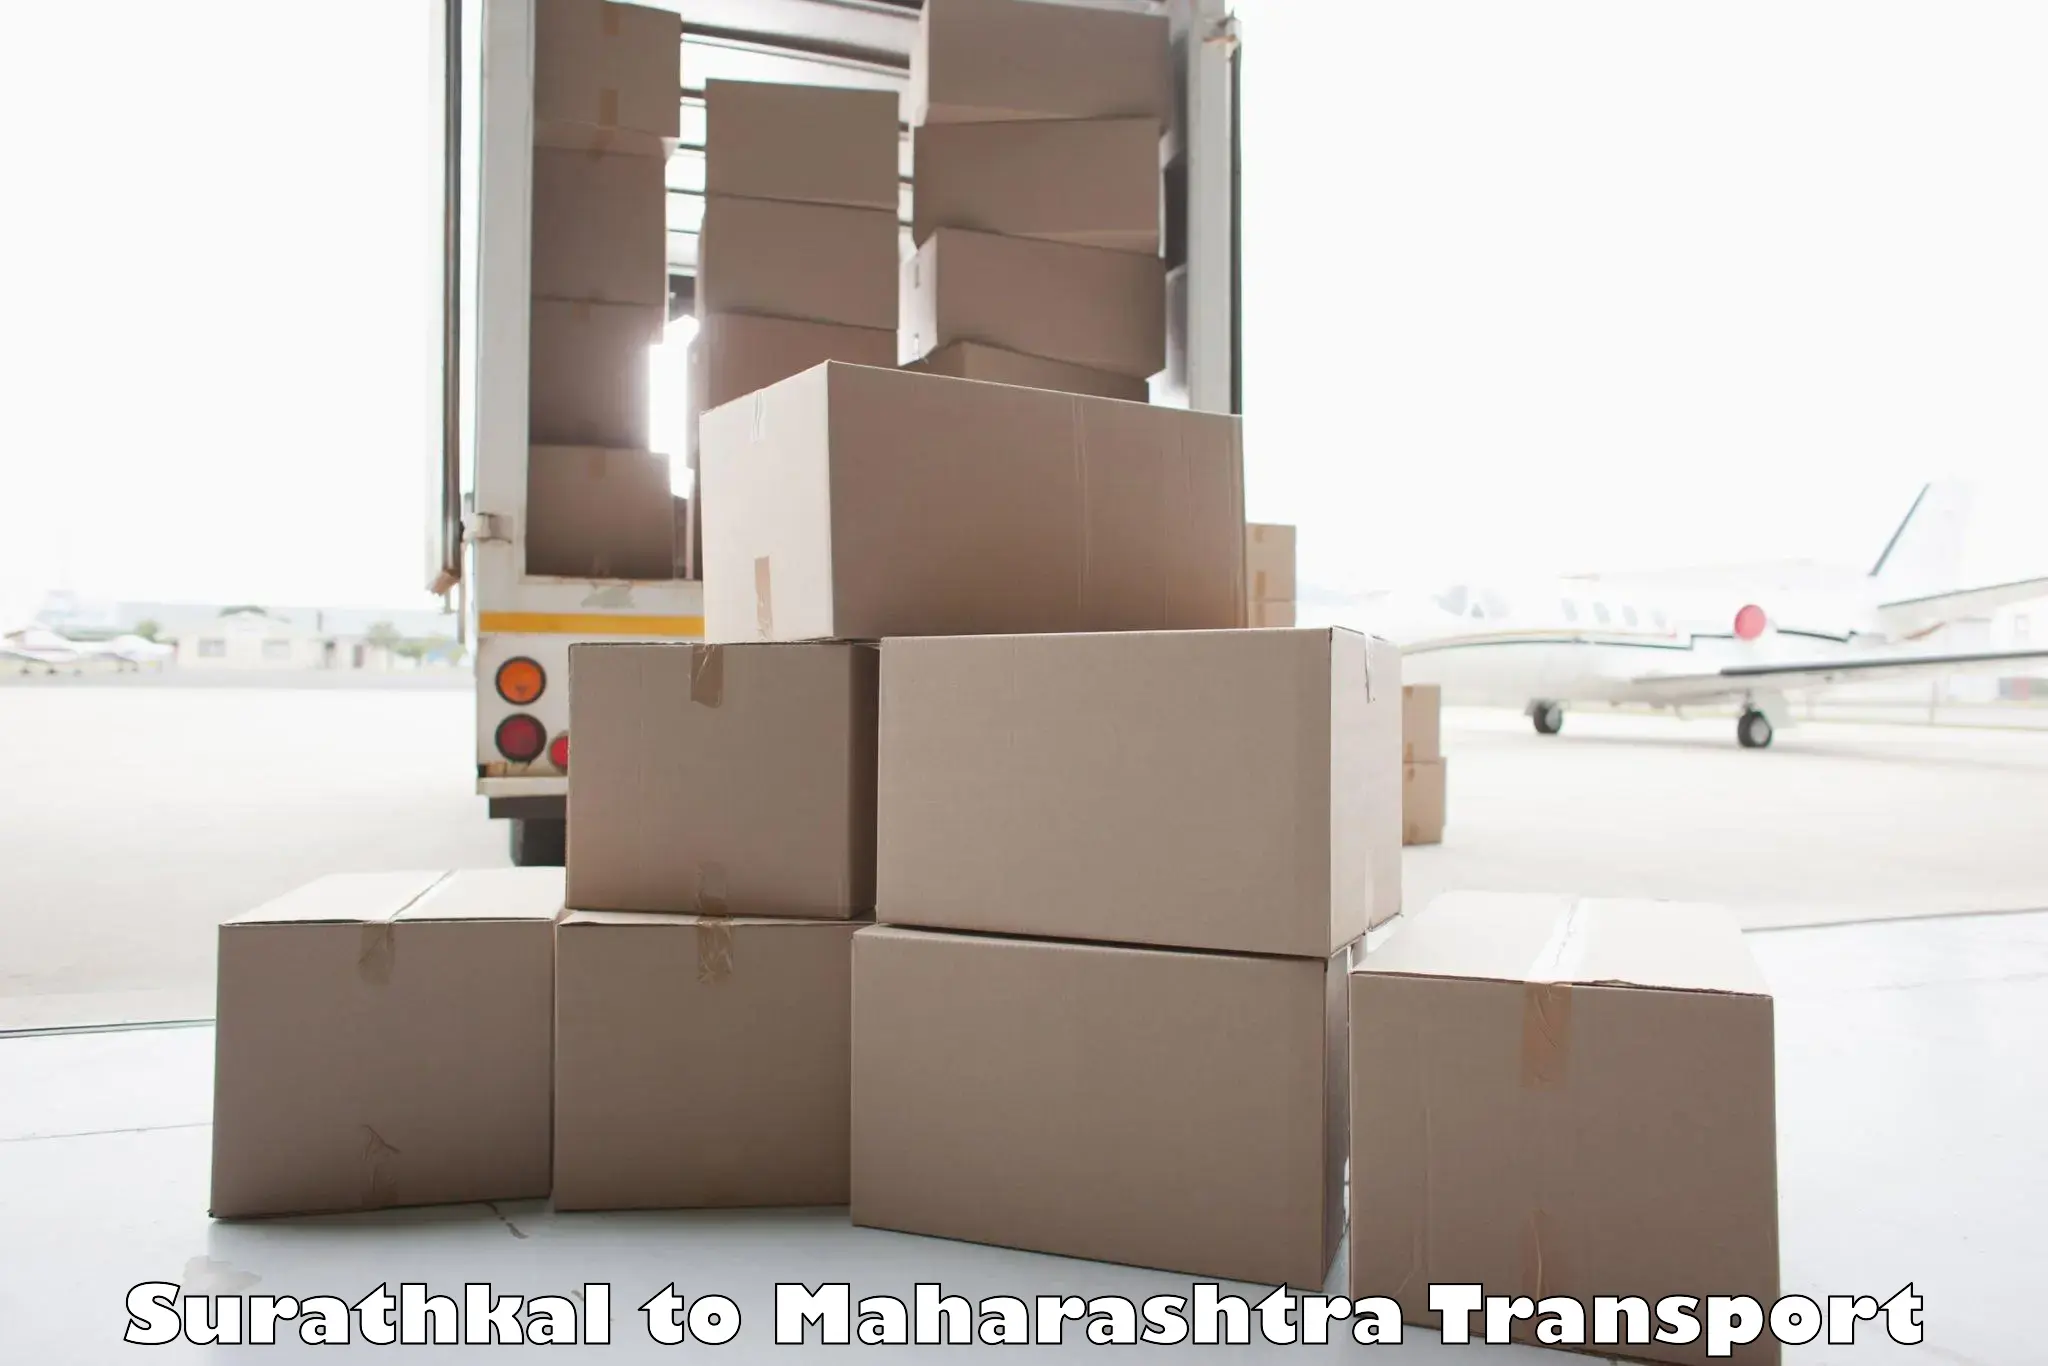 Interstate transport services Surathkal to Chembur